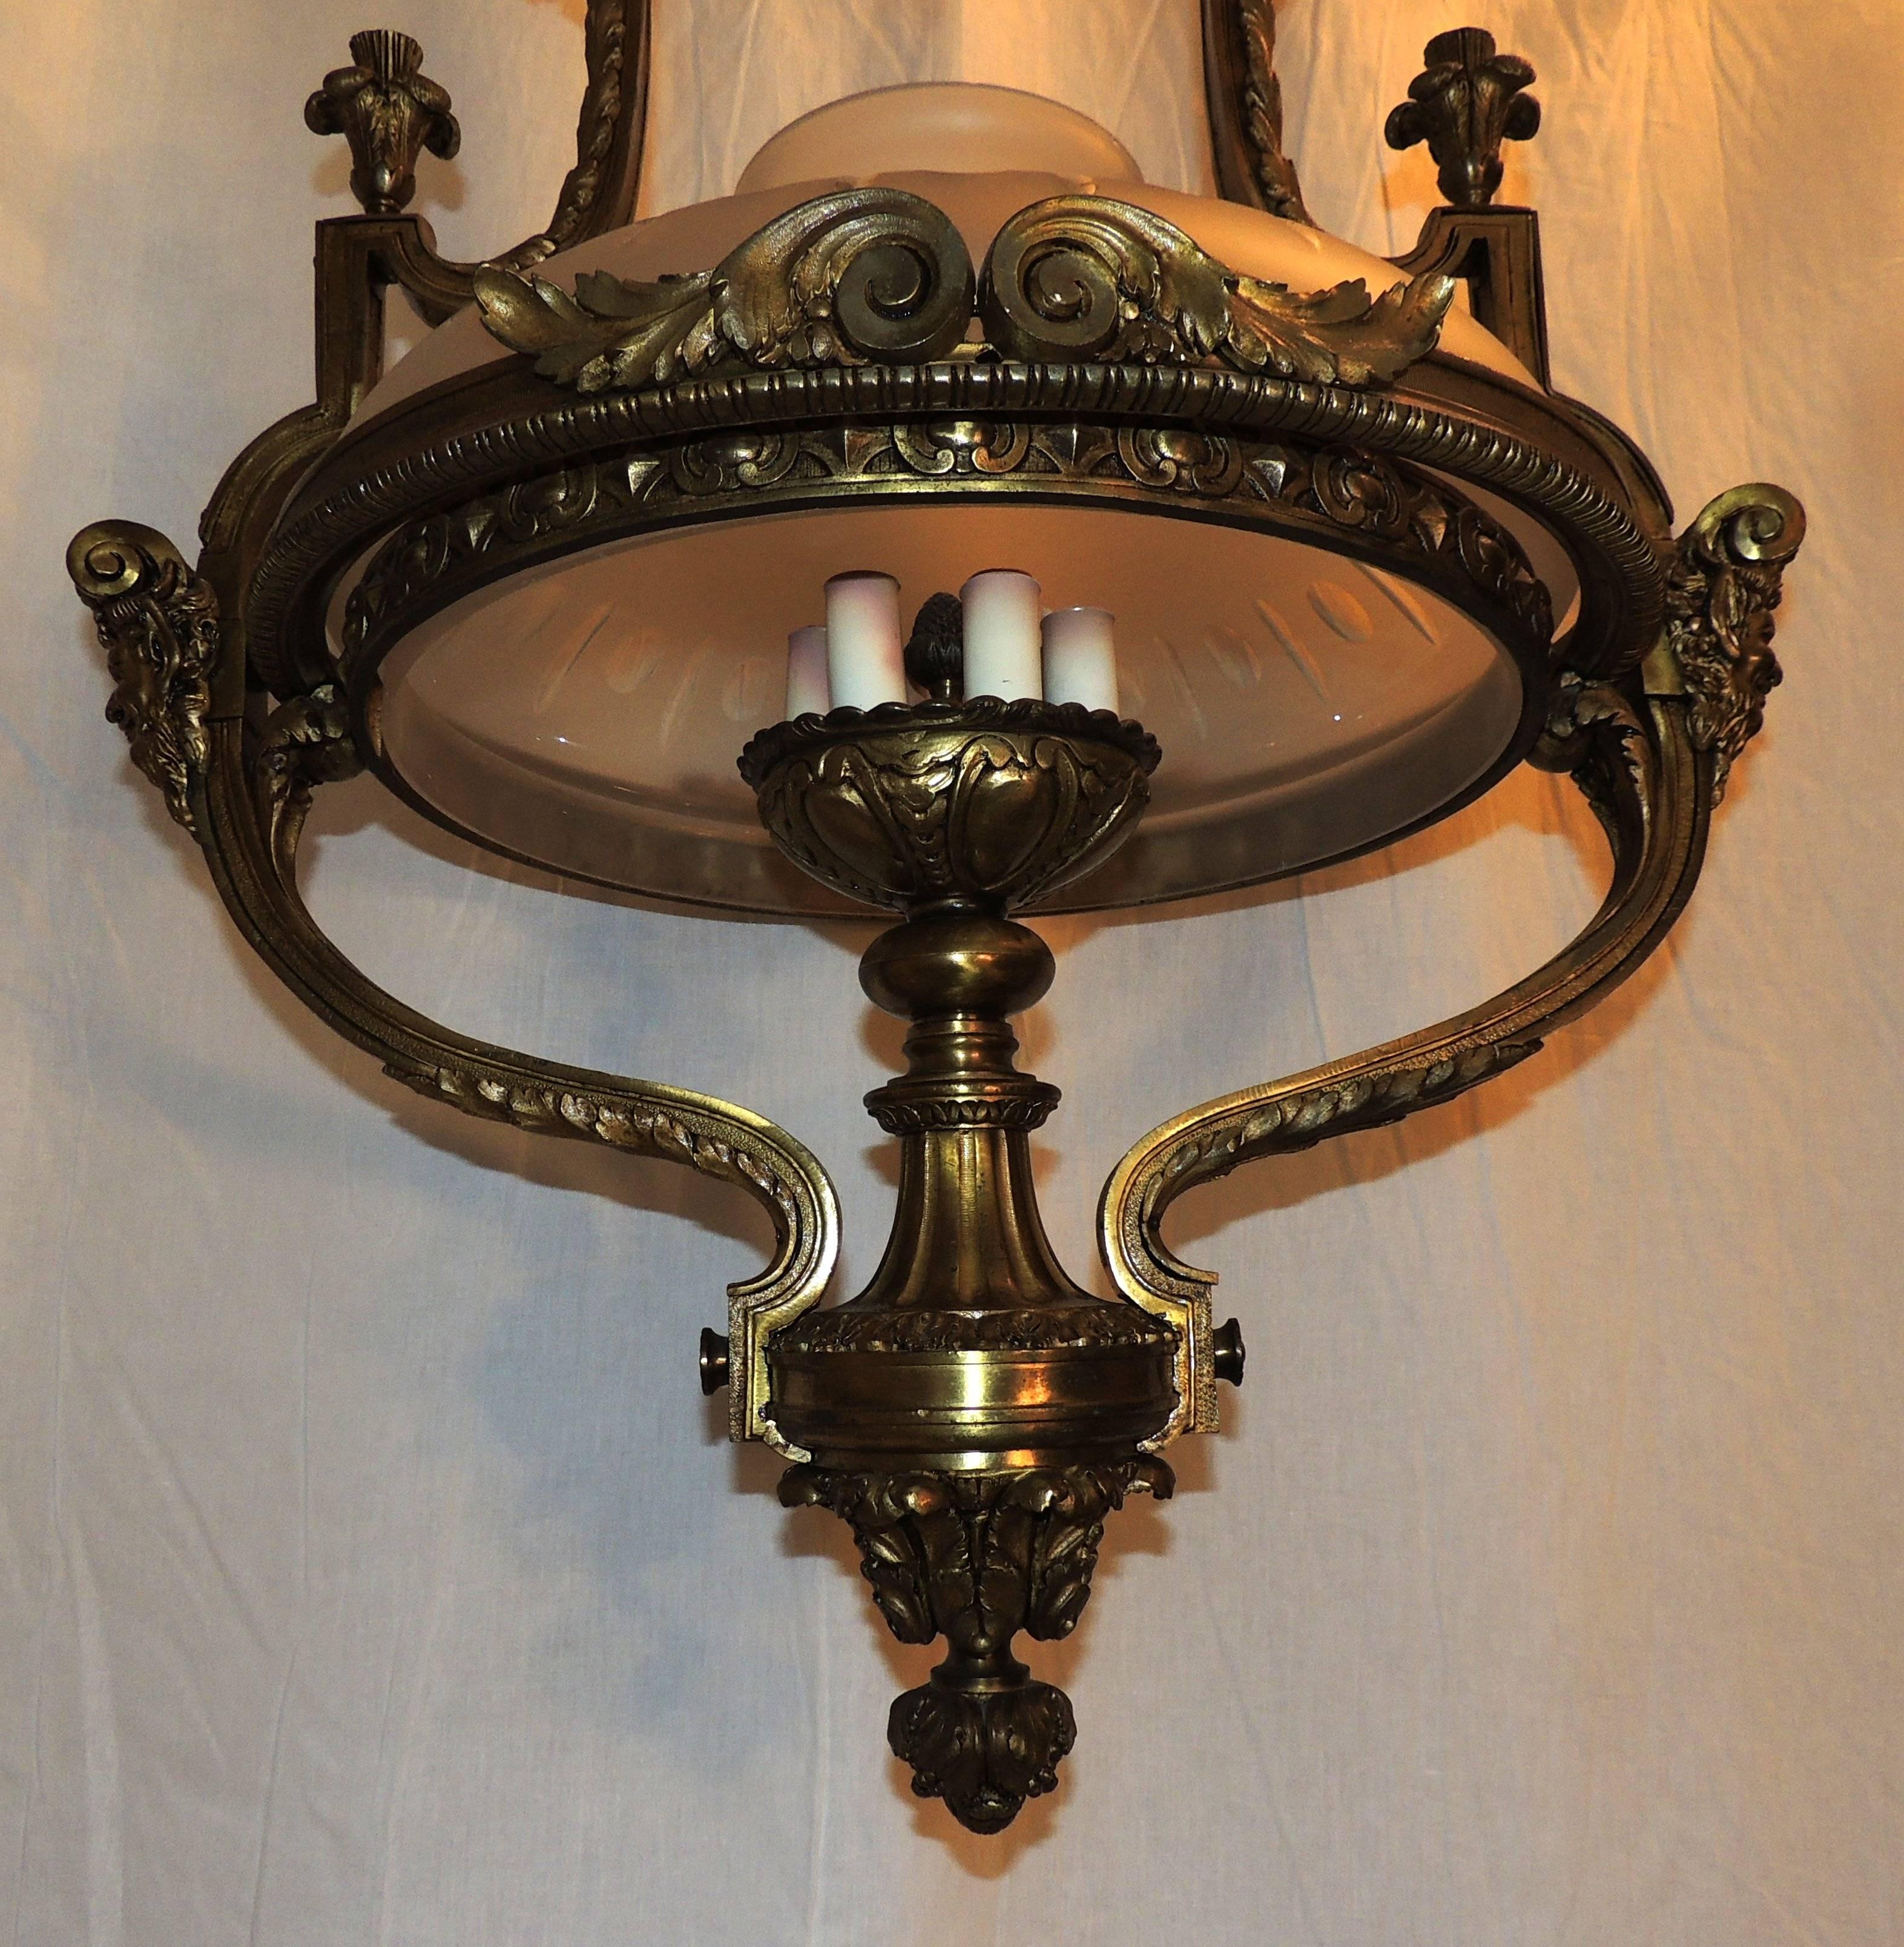 Monumental French Victorian Gilt Bronze Frosted Globe Chandelier Fixture Lantern In Good Condition For Sale In Roslyn, NY